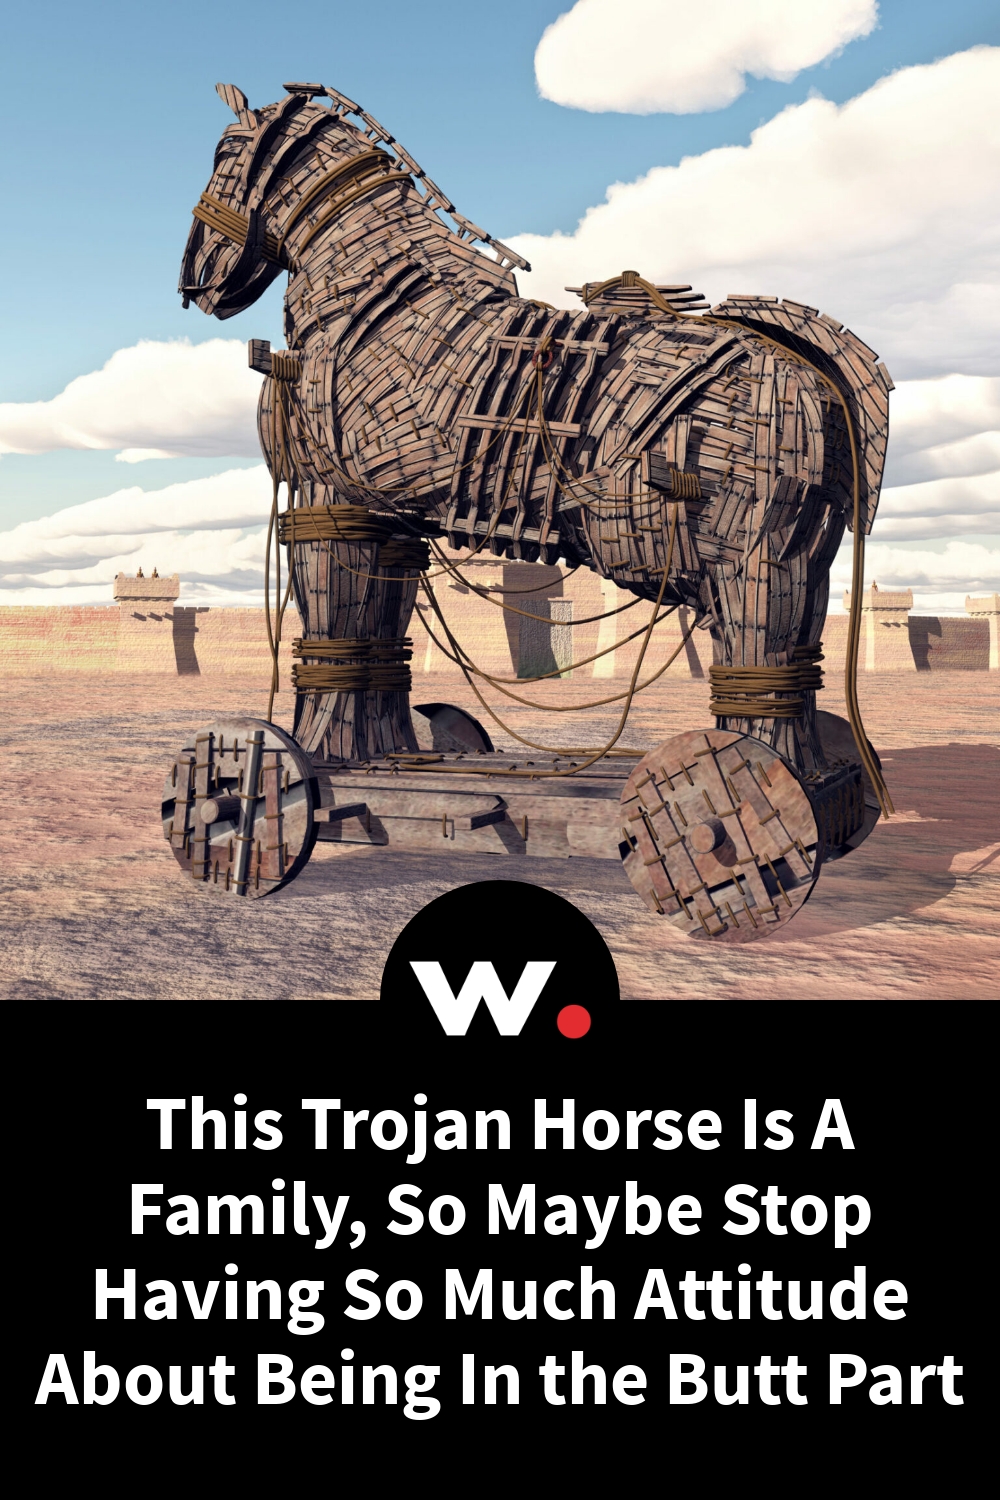 This Trojan Horse Is A Family, So Maybe Stop Having So Much Attitude About Being In the Butt Part